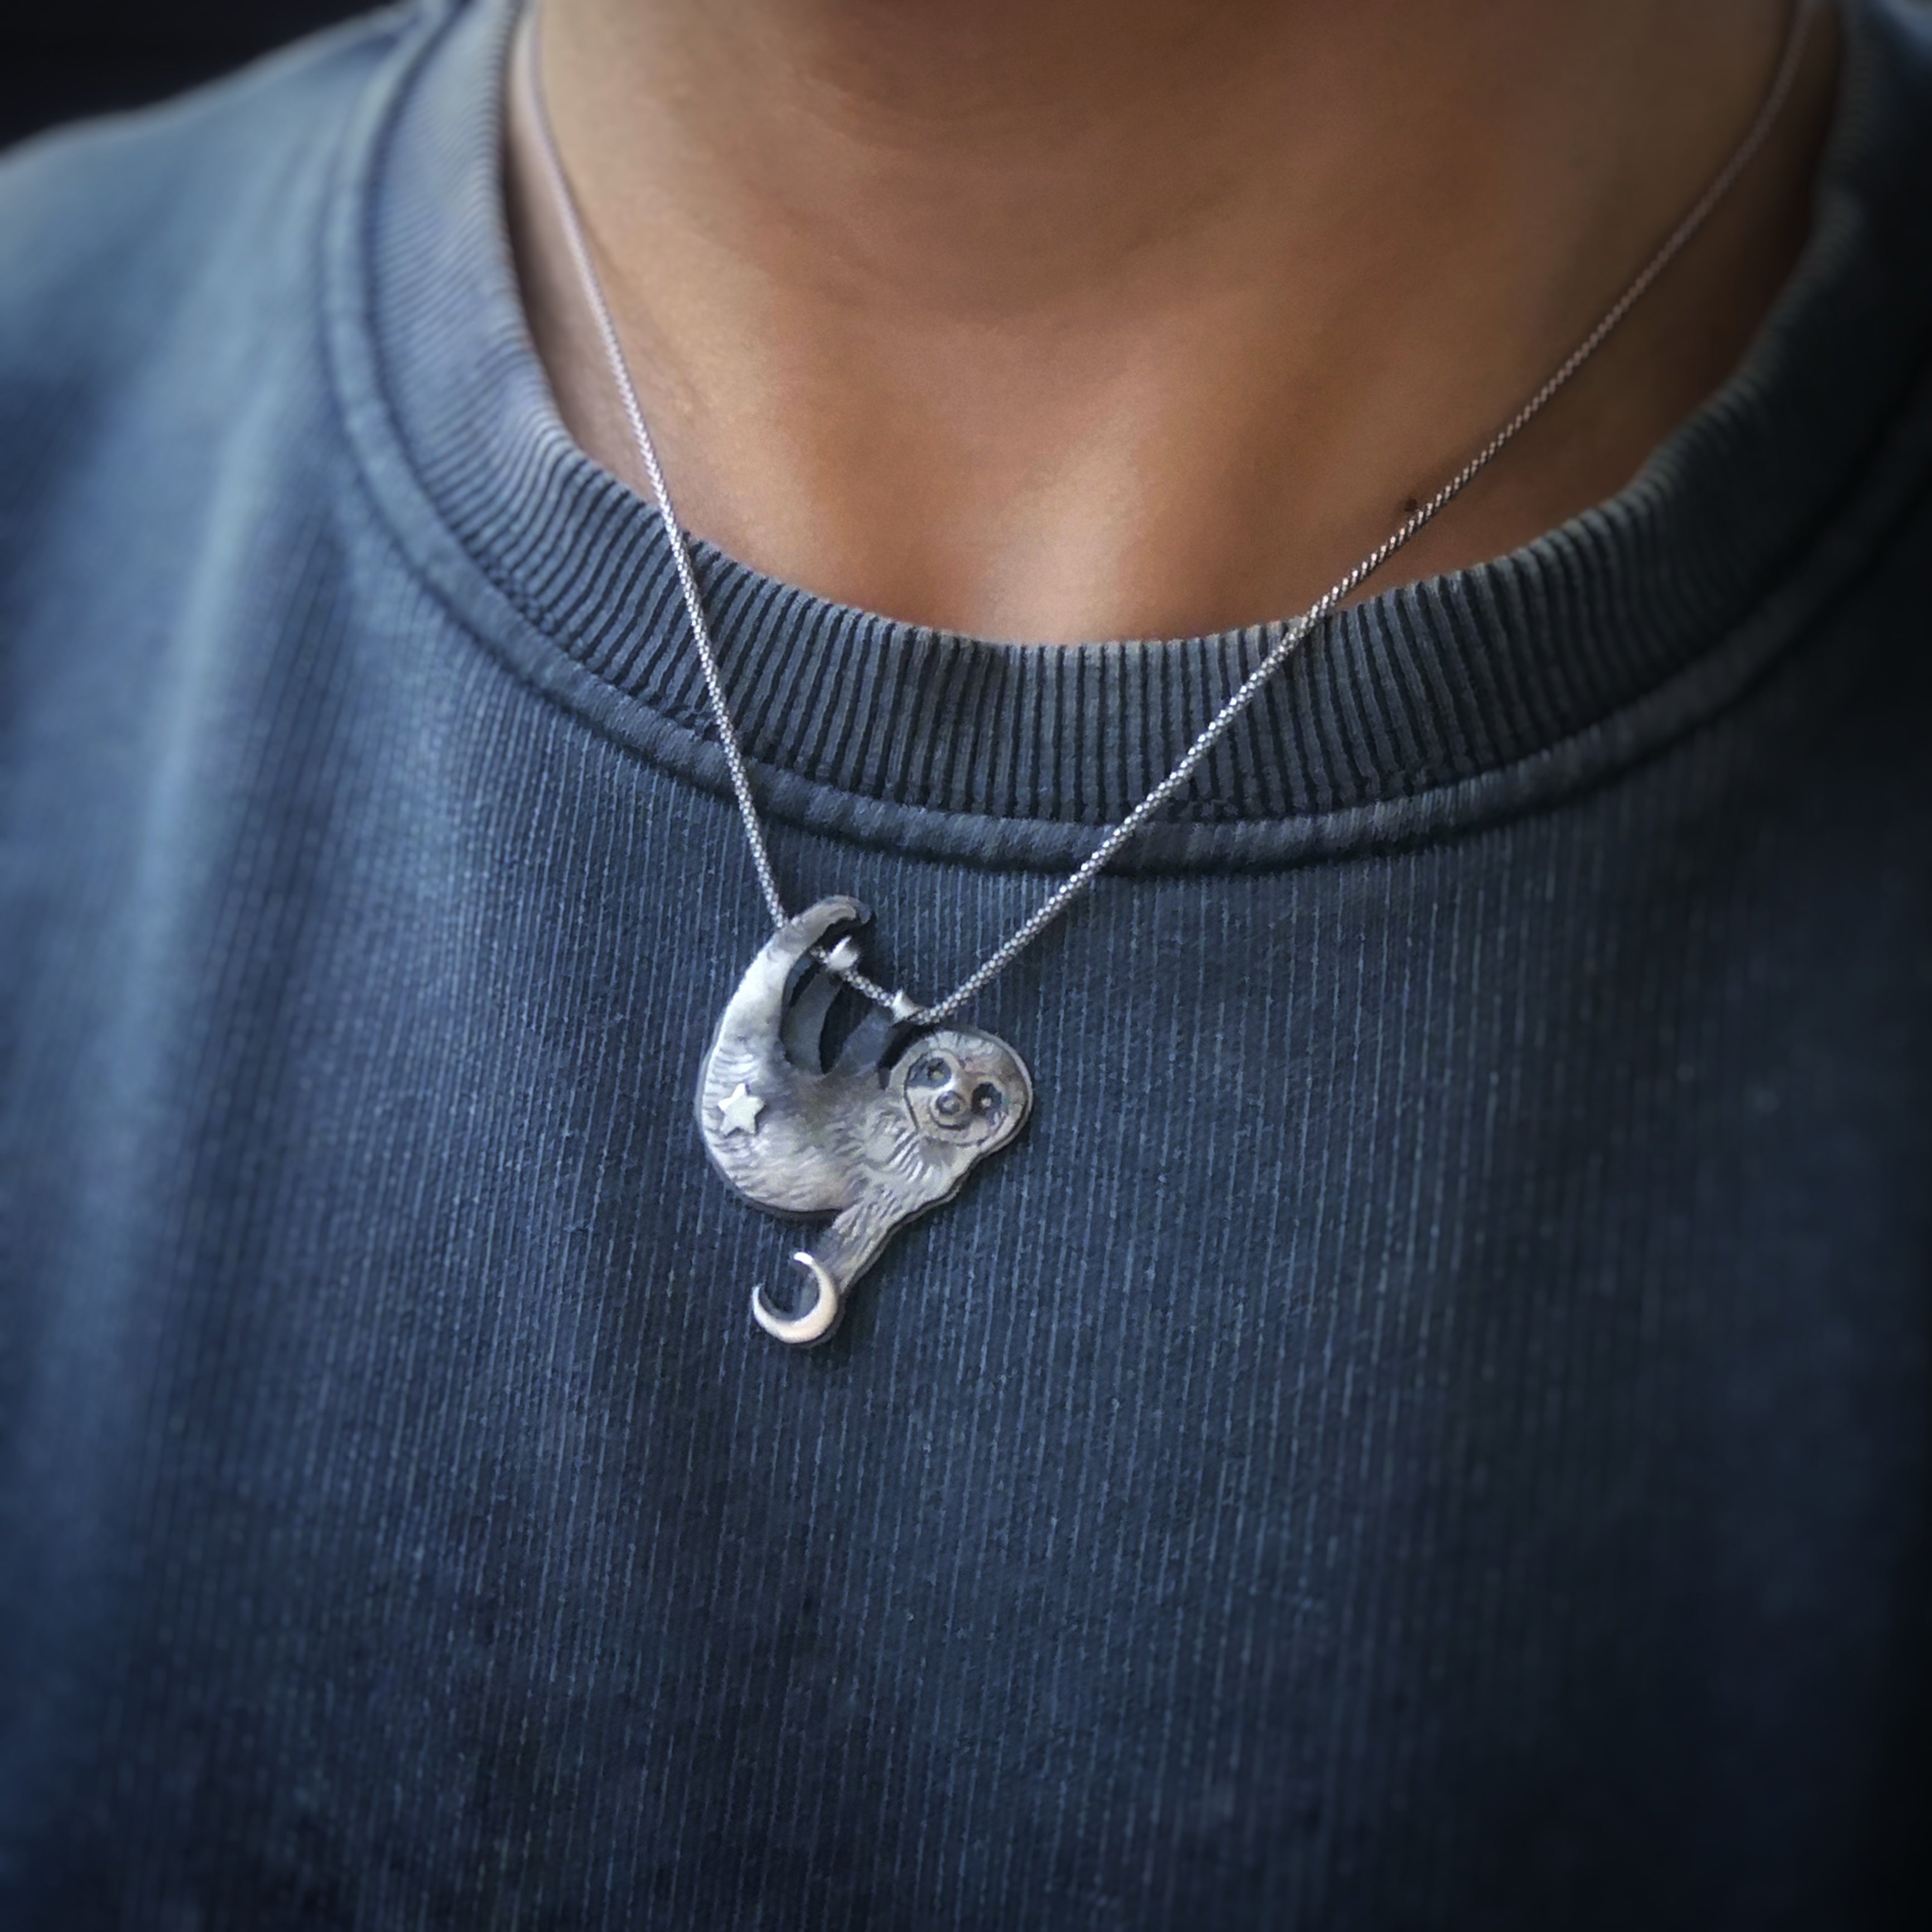 The Sloth Necklace - Just Relax